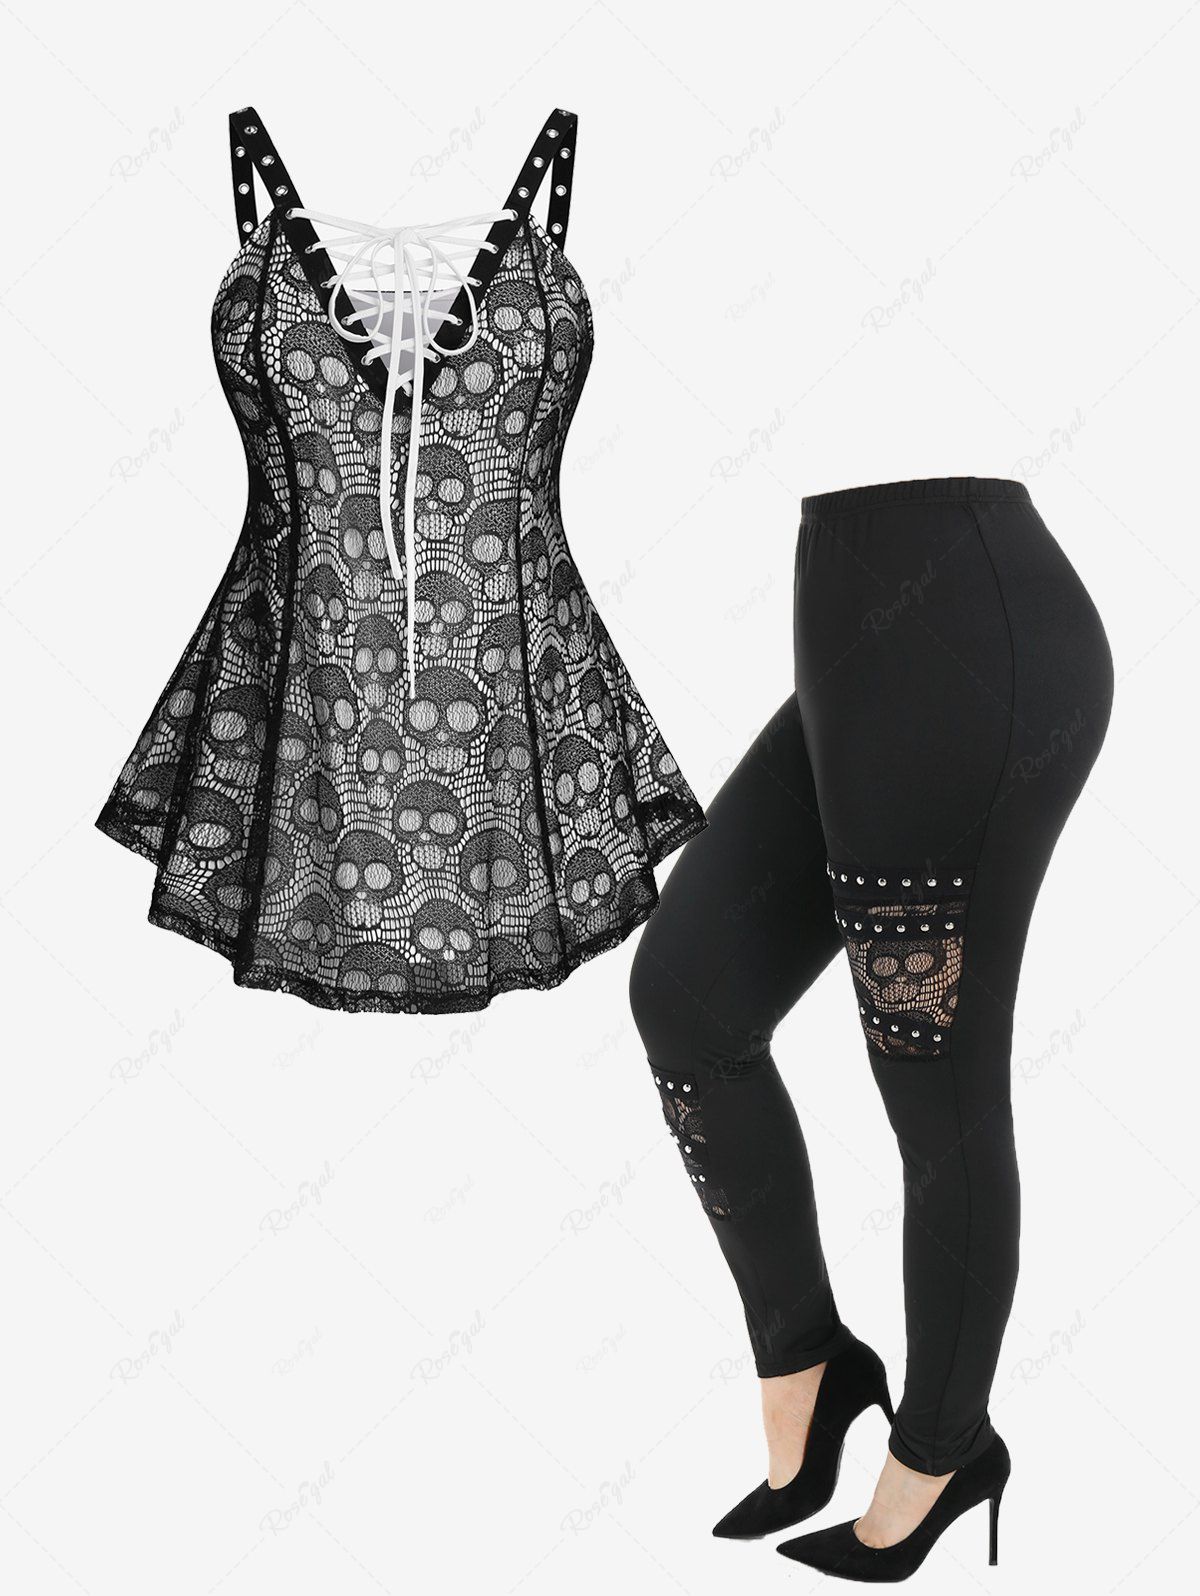 Best Gothic Skulls Lace Up Grommet Colorblock Tank Top and Rivets Pull On Pants Outfit  